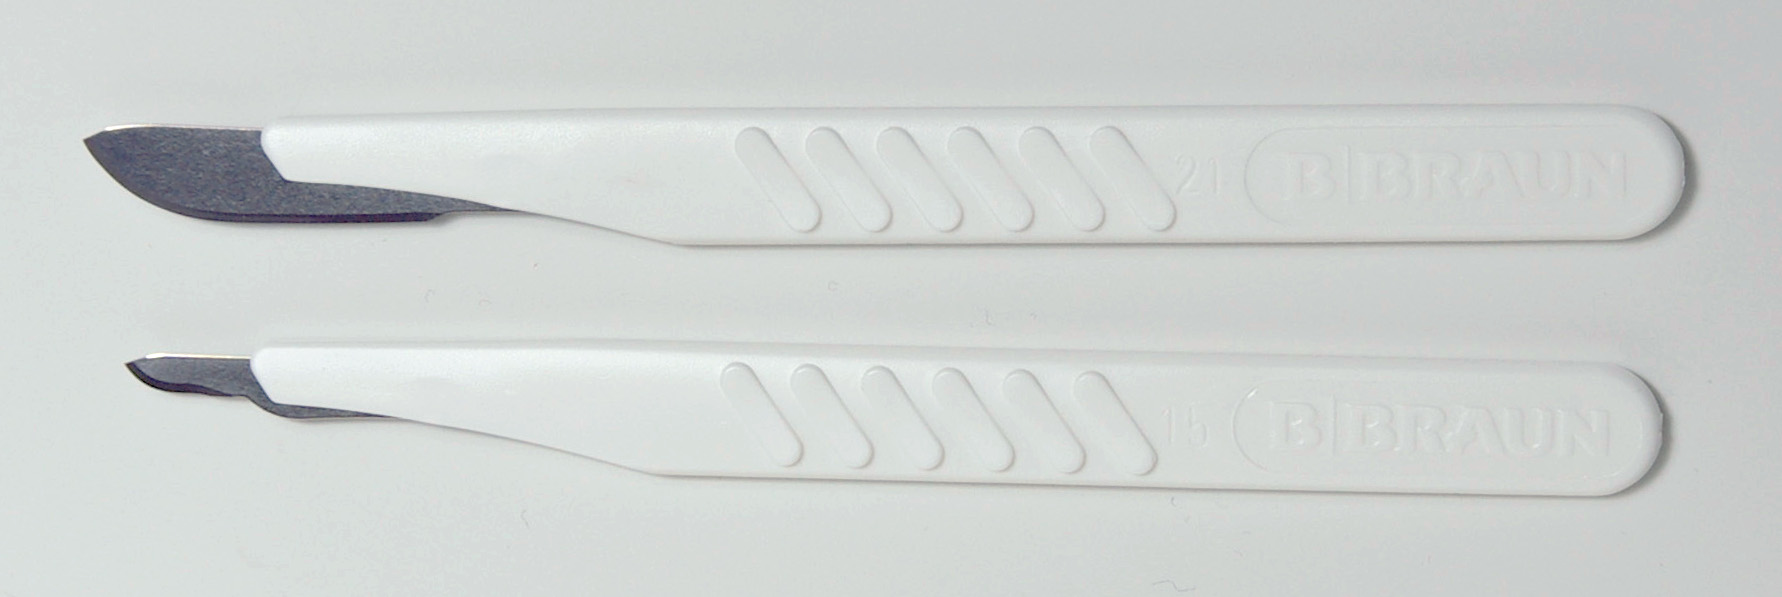 https://upload.wikimedia.org/wikipedia/commons/2/25/Disposable_scalpels-small_and_large.jpg